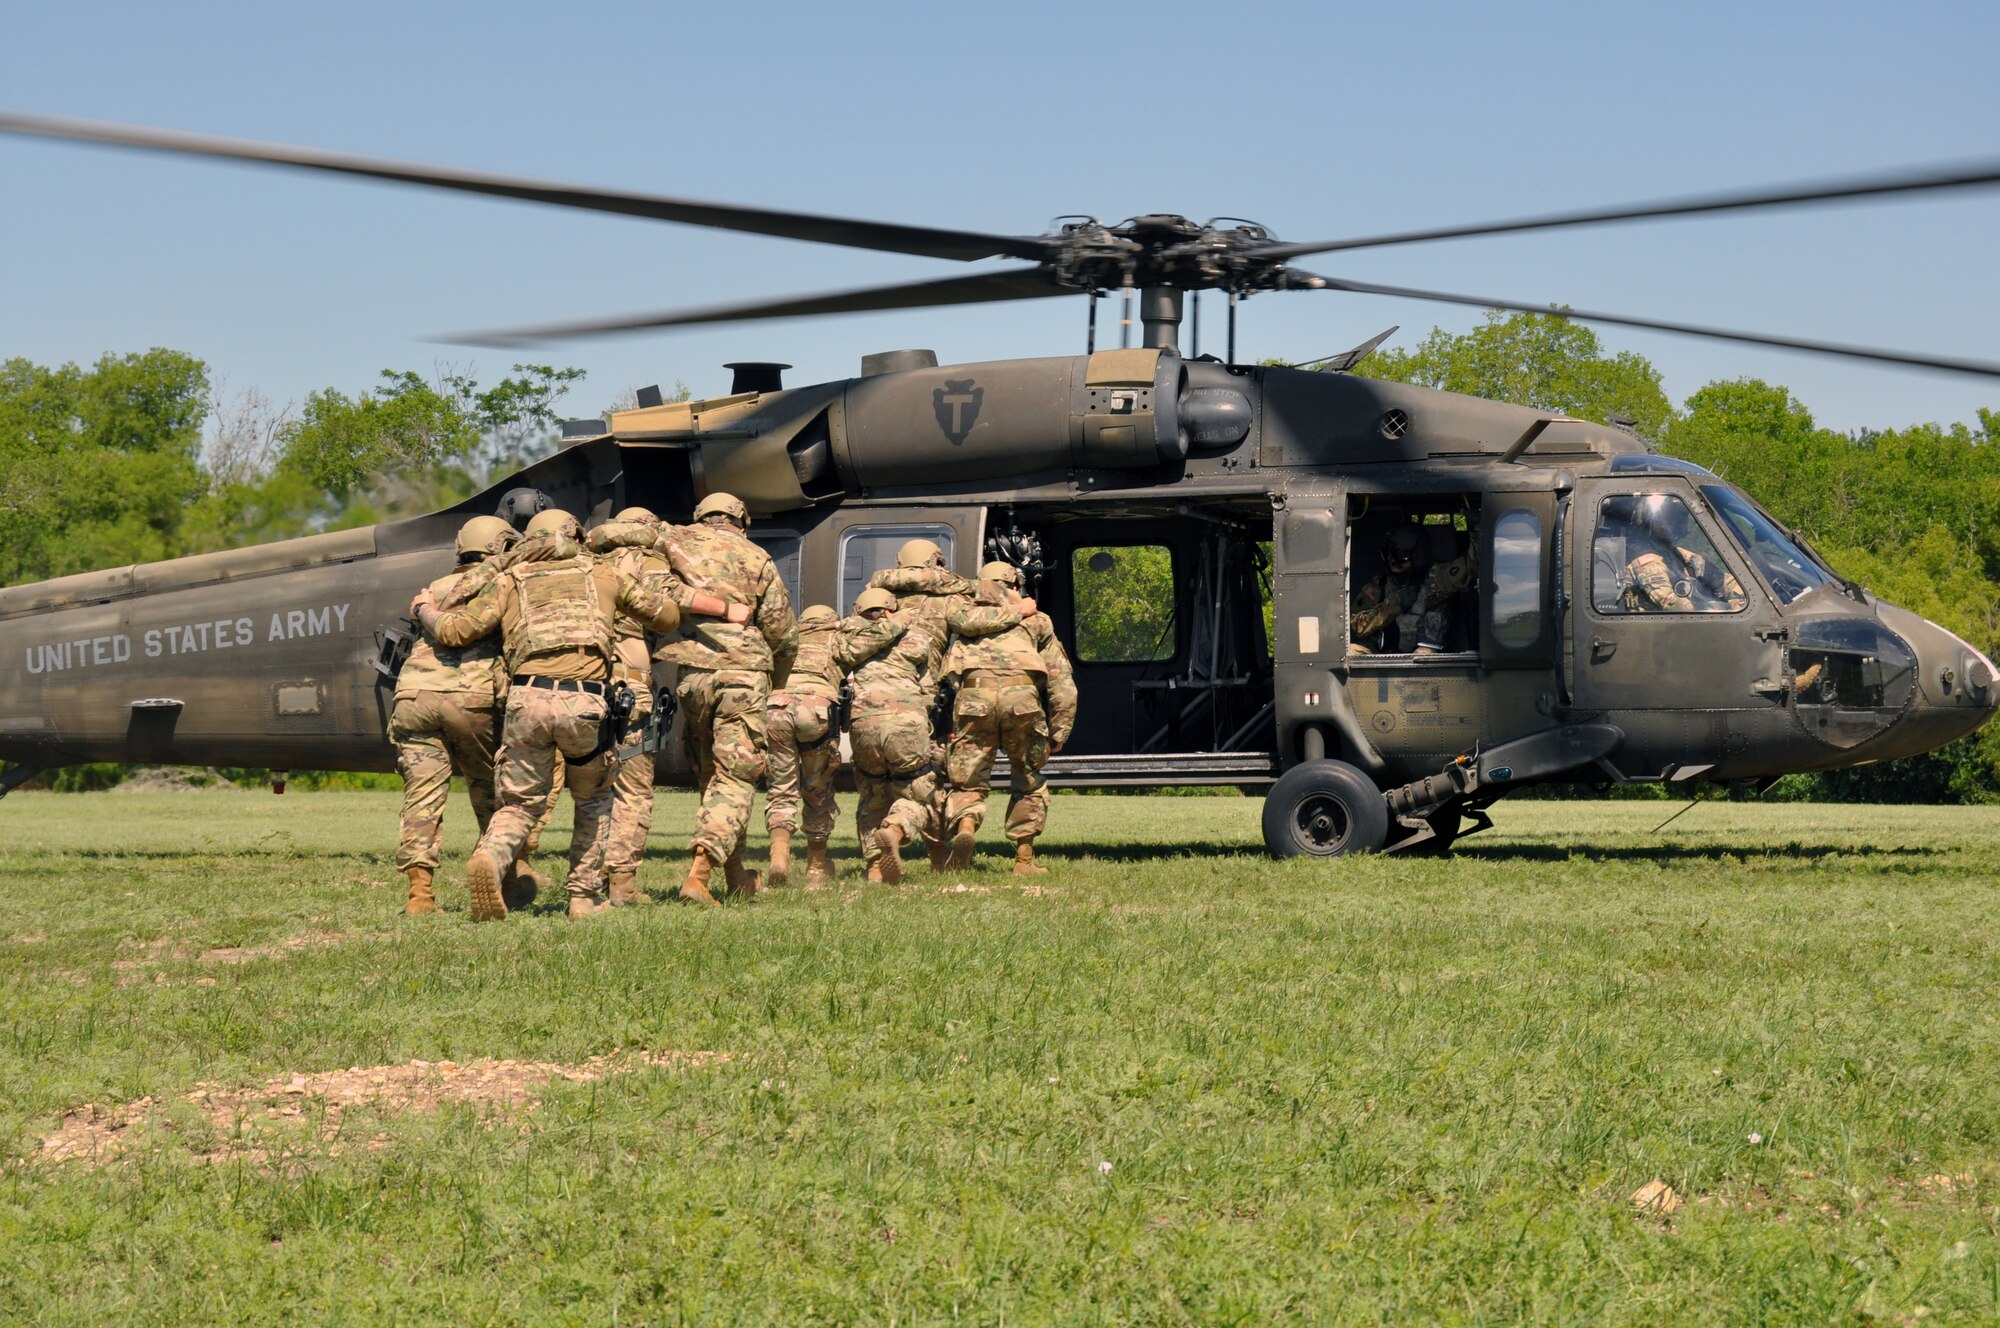 433rd Security Forces Squadron defenders prepare to load simulated injured patients on an Army National Guard UH-60 Blackhawk helicopter at Joint Base San Antonio-Chapman Annex, Texas, May 6, 2021 during the 433rd Airlift Wing’s Exercise Alamo Bravo. During this portion of the exercise, the defenders were working with 433rd Civil Engineer Squadron explosive ordnance disposal technicians on simulated convoy operations. (U.S. Air Force photo by Tech. Sgt. Iram Carmona)